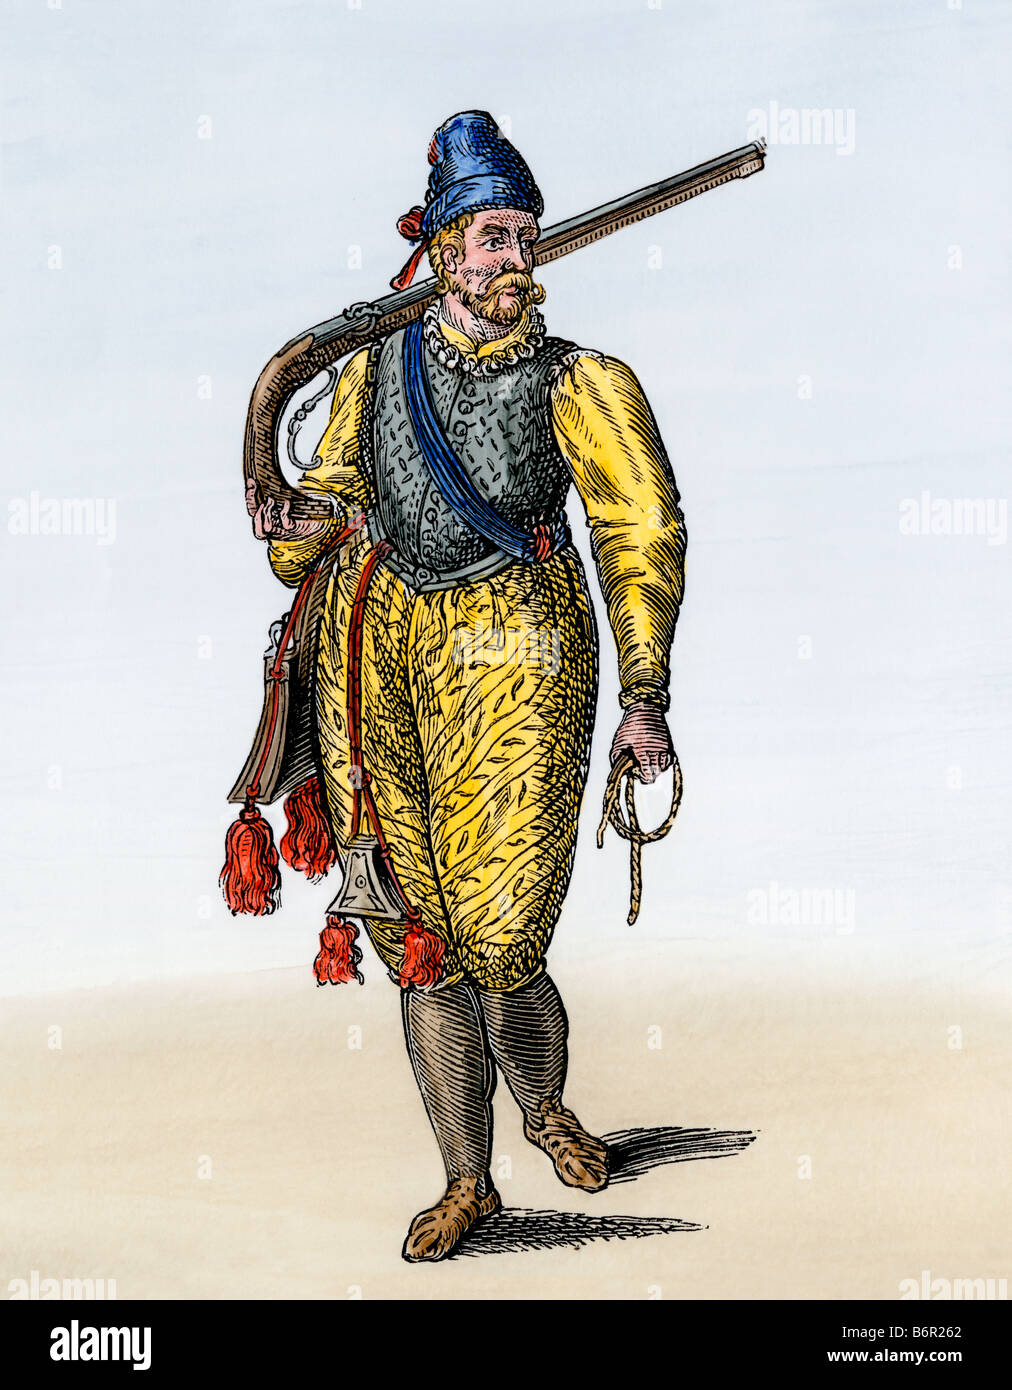 Dutch soldier carrying an arquebus 1500s or 1600s. Hand-colored woodcut Stock Photo